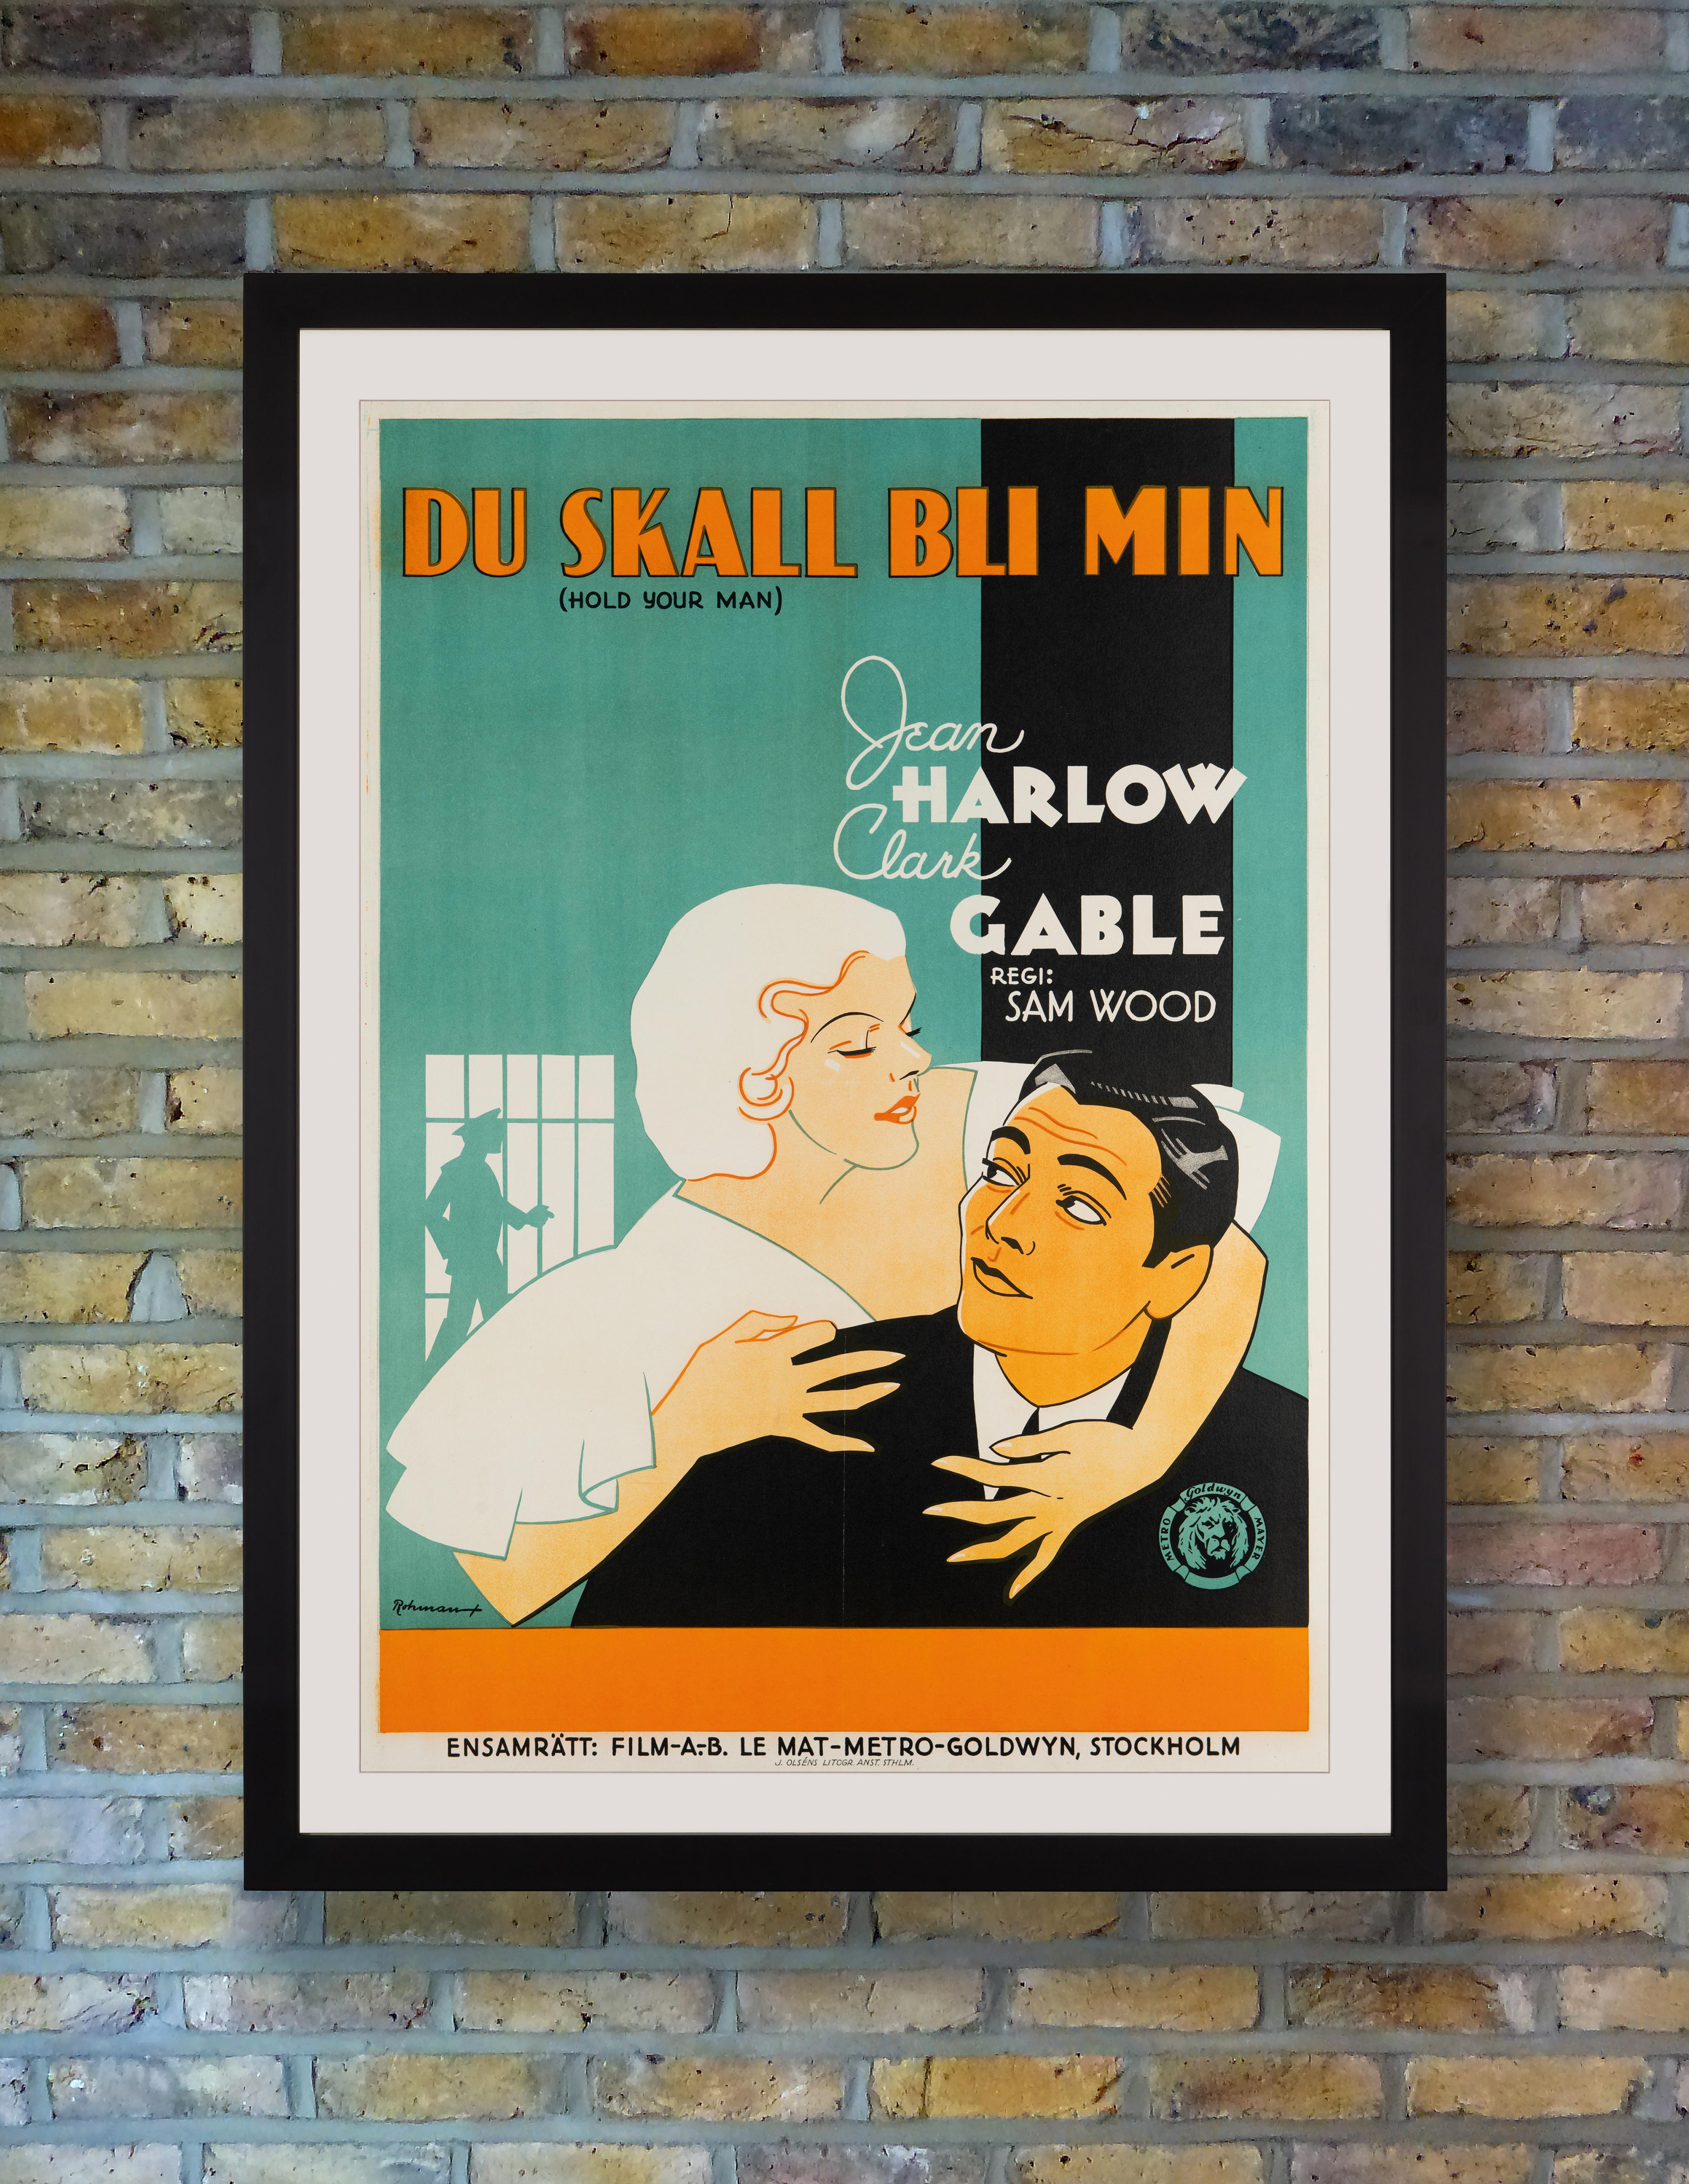 A splendid stone lithograph poster with bold Art Deco artwork by noted Swedish designer Eric Rohman for the Swedish release of MGM's 1933 pre-Code romantic drama 'Hold Your Man.' Starring regular collaborators Jean Harlow and Clark Gable as small